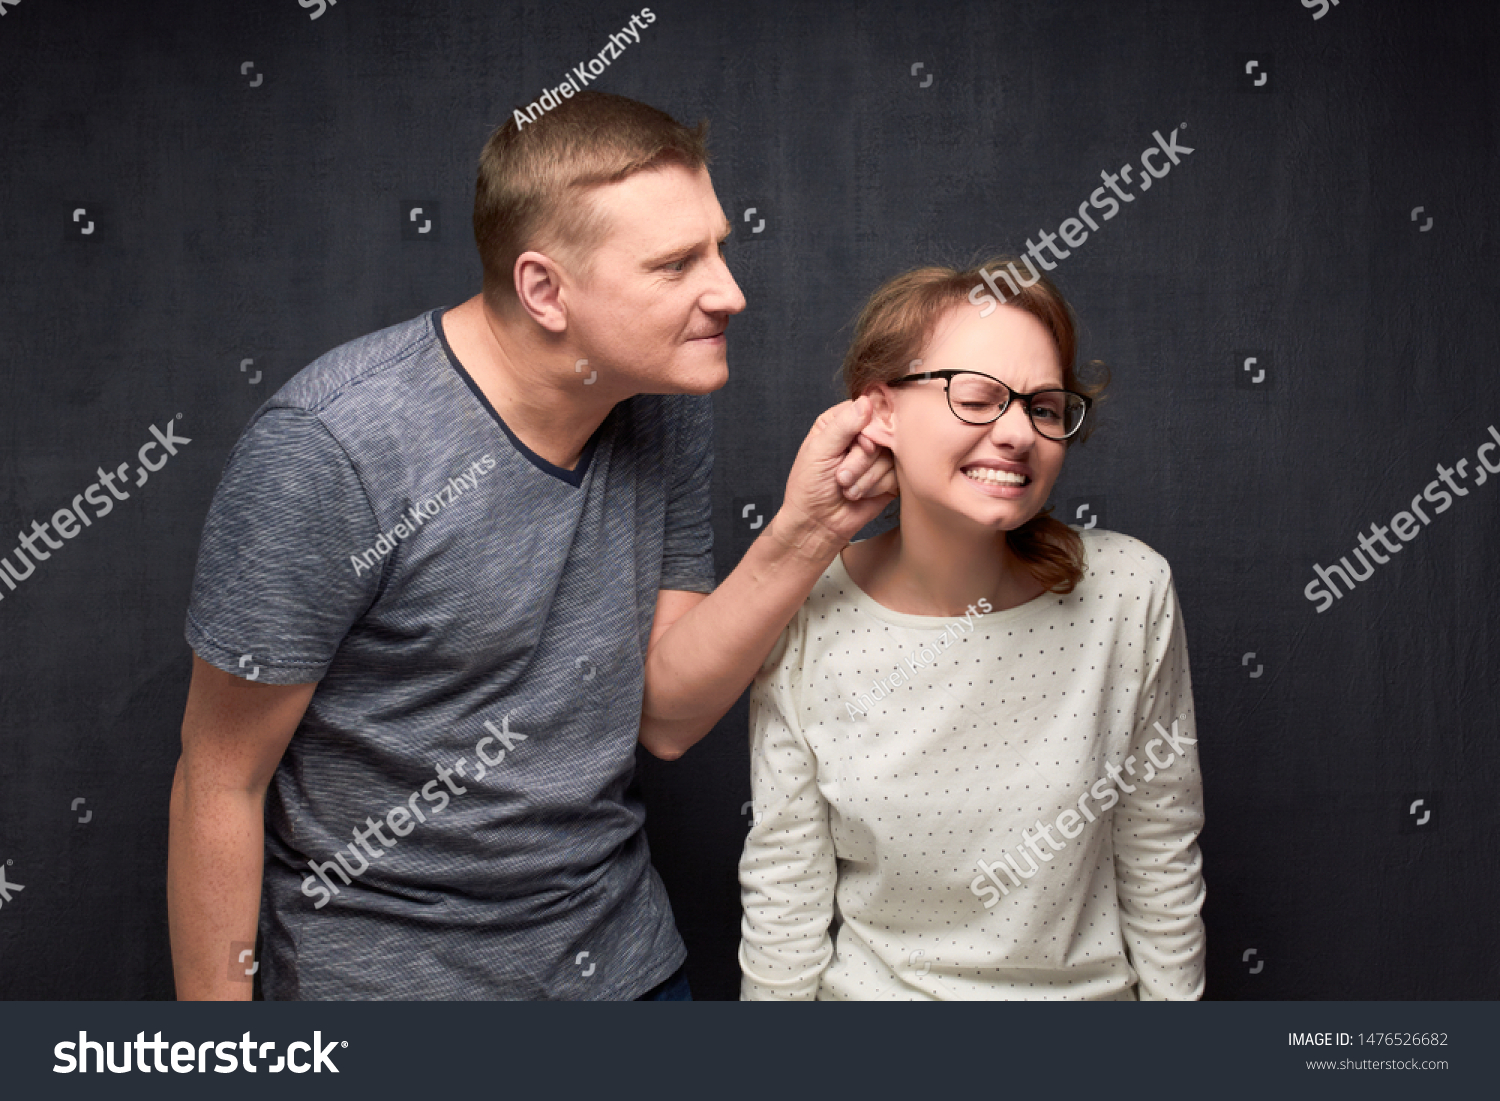 Studio waist-up shot of dissatisfied man frowning face, pulling woman by ear while scolding, woman is grimacing from pain, over gray background. Strict boyfriend and misbehaving girlfriend #1476526682